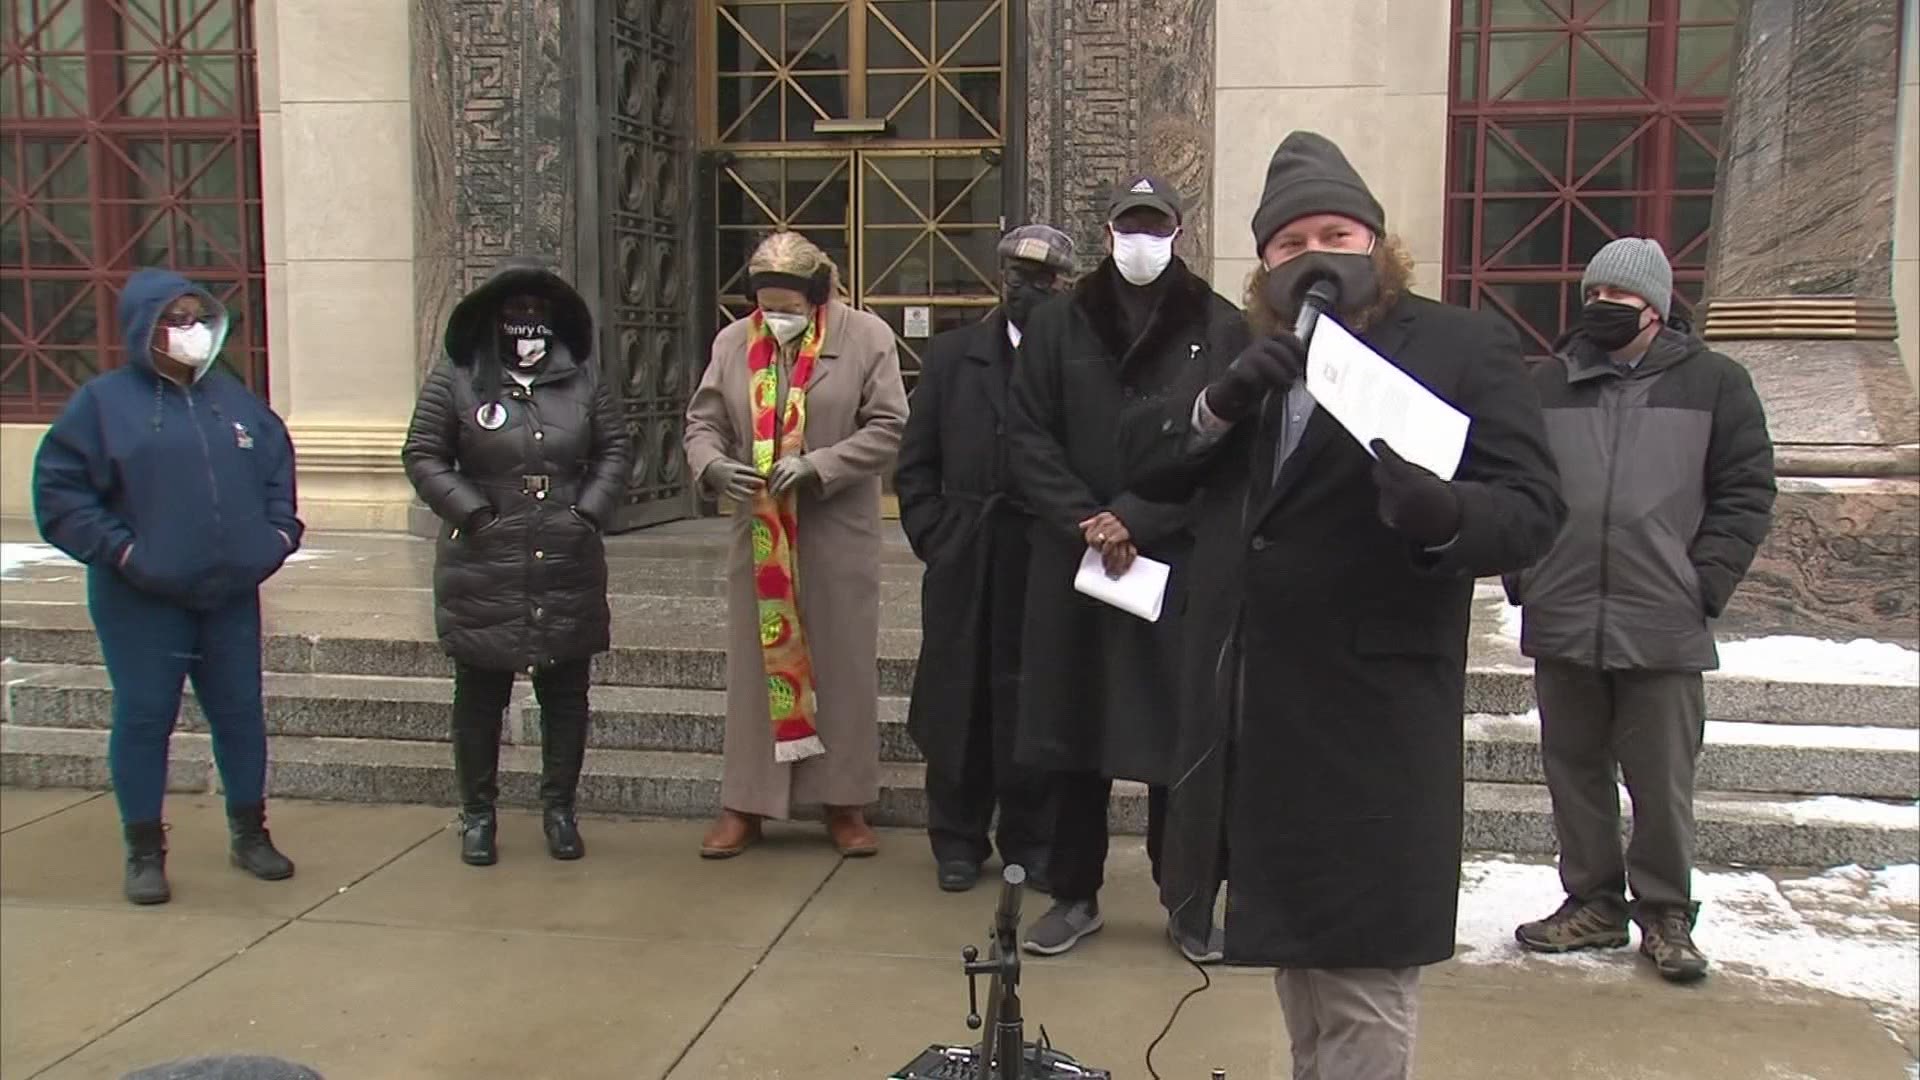 Several Columbus faith leaders say the demotion of Thomas Quinlan is not enough.